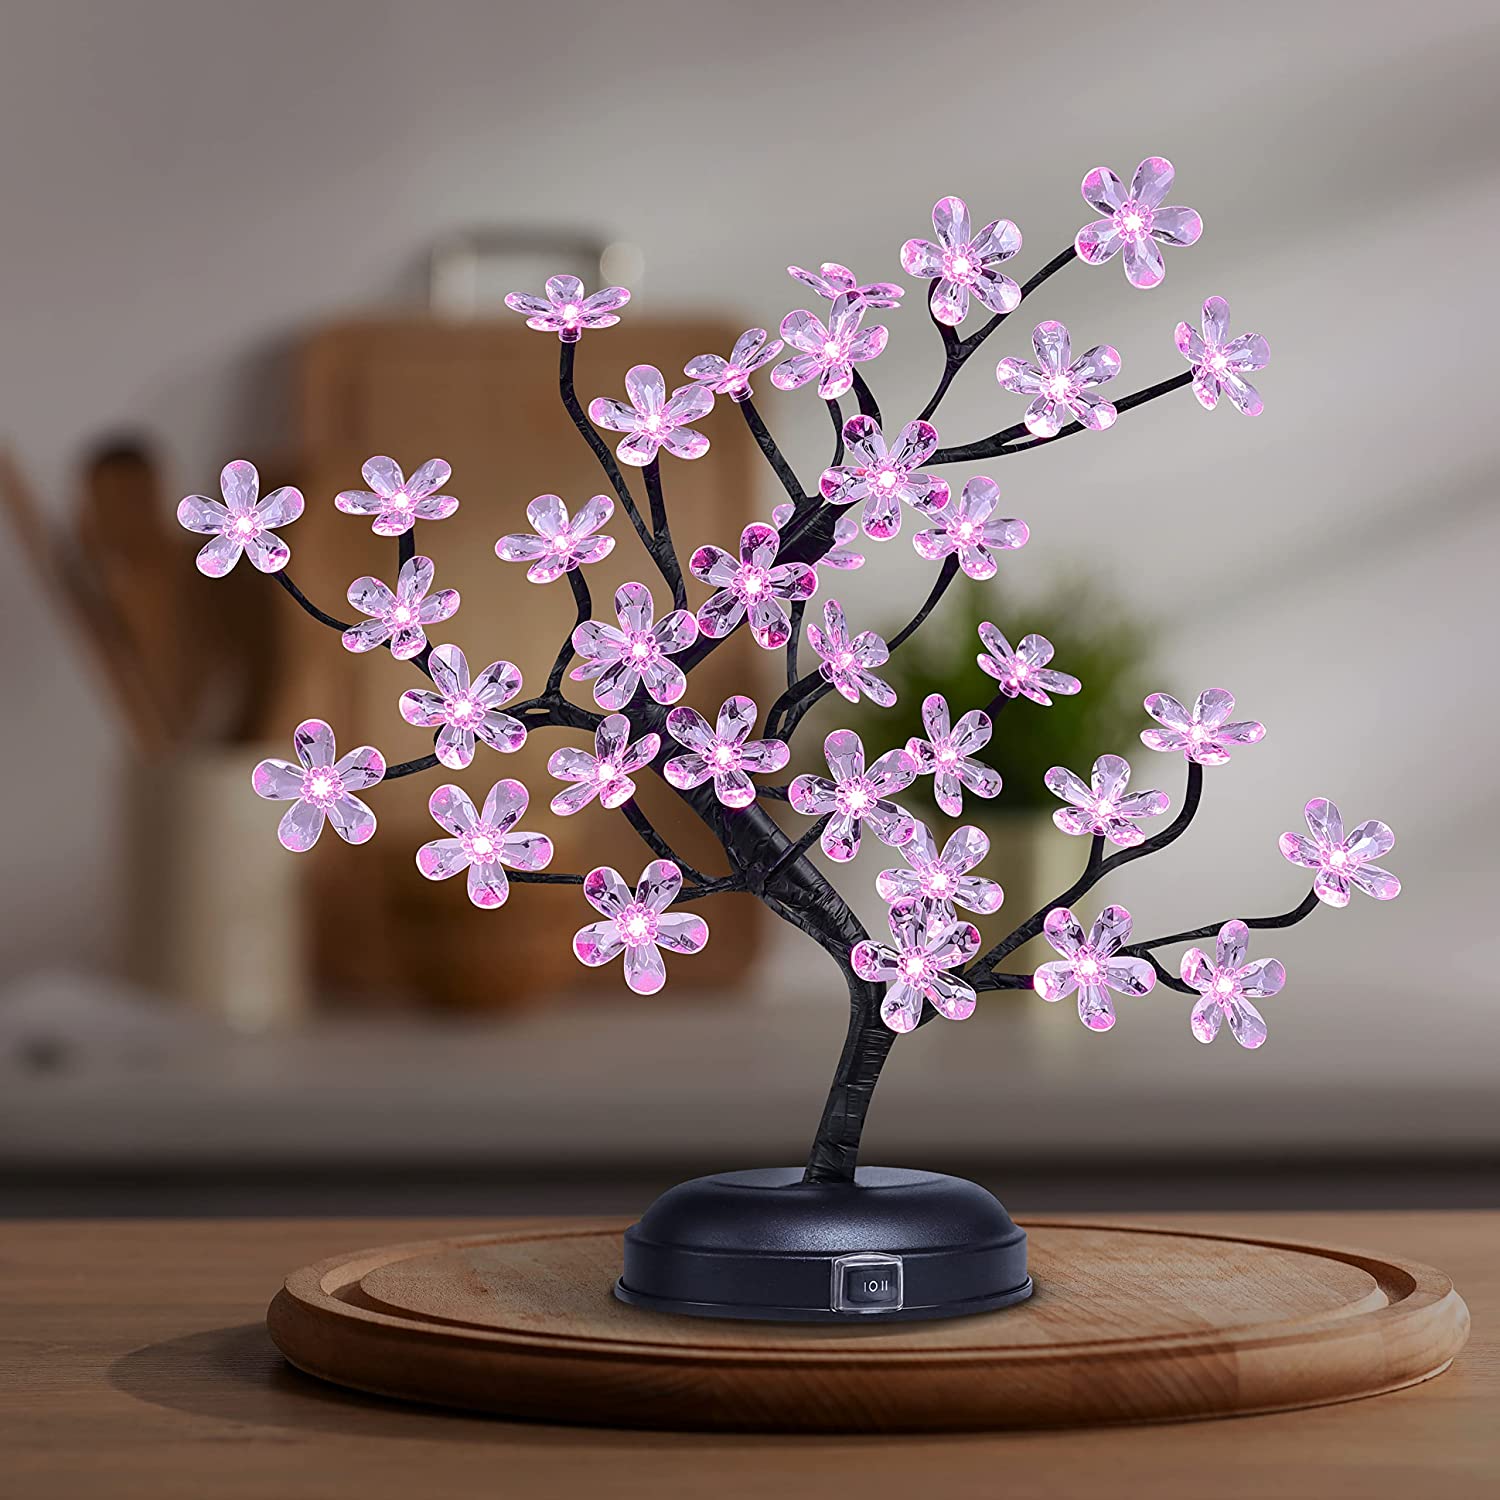 18IN Lighted Cherry Blossom Tree Lamp with 36 Acrylic LED, Adapter Plug in & Battery Powered, for Indoor and Outdoor, Pink White-LIGHTSHARE